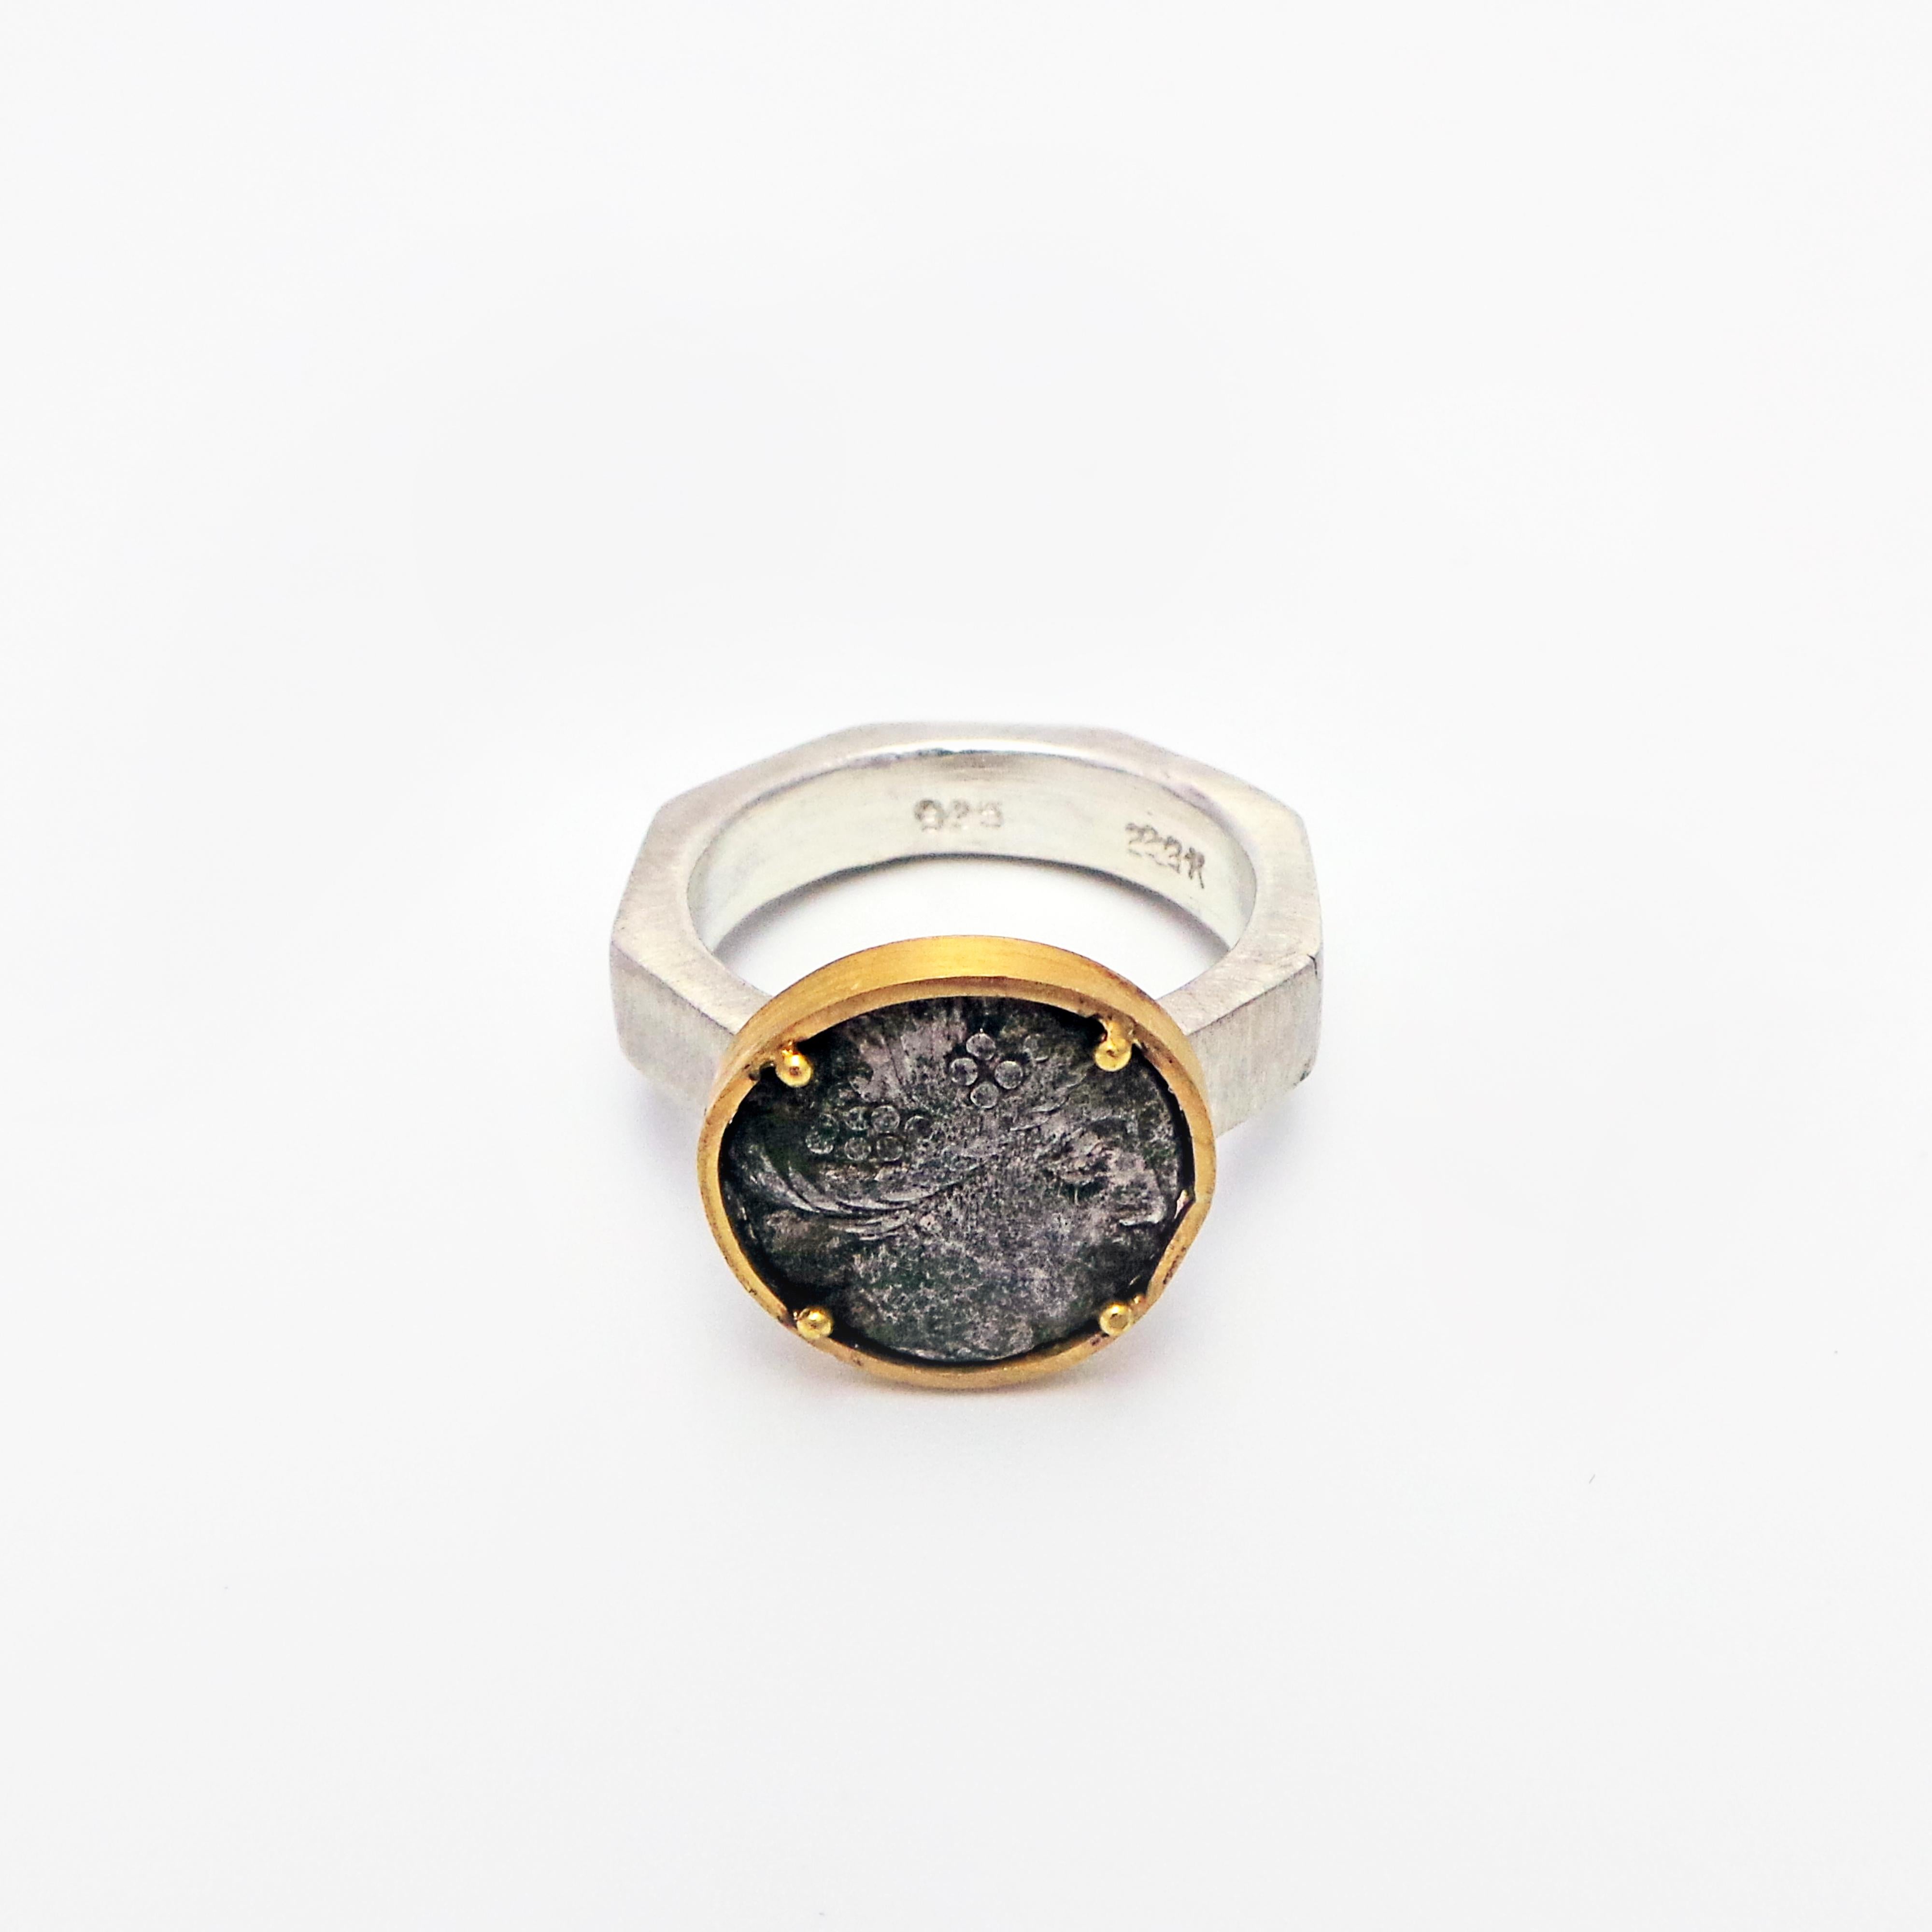 Authentic ancient Greek silver coin set in 22k yellow gold and mounted on a brushed/ textured sterling silver octagon shaped ring band. Size 6 1/2. Old world meets modern.